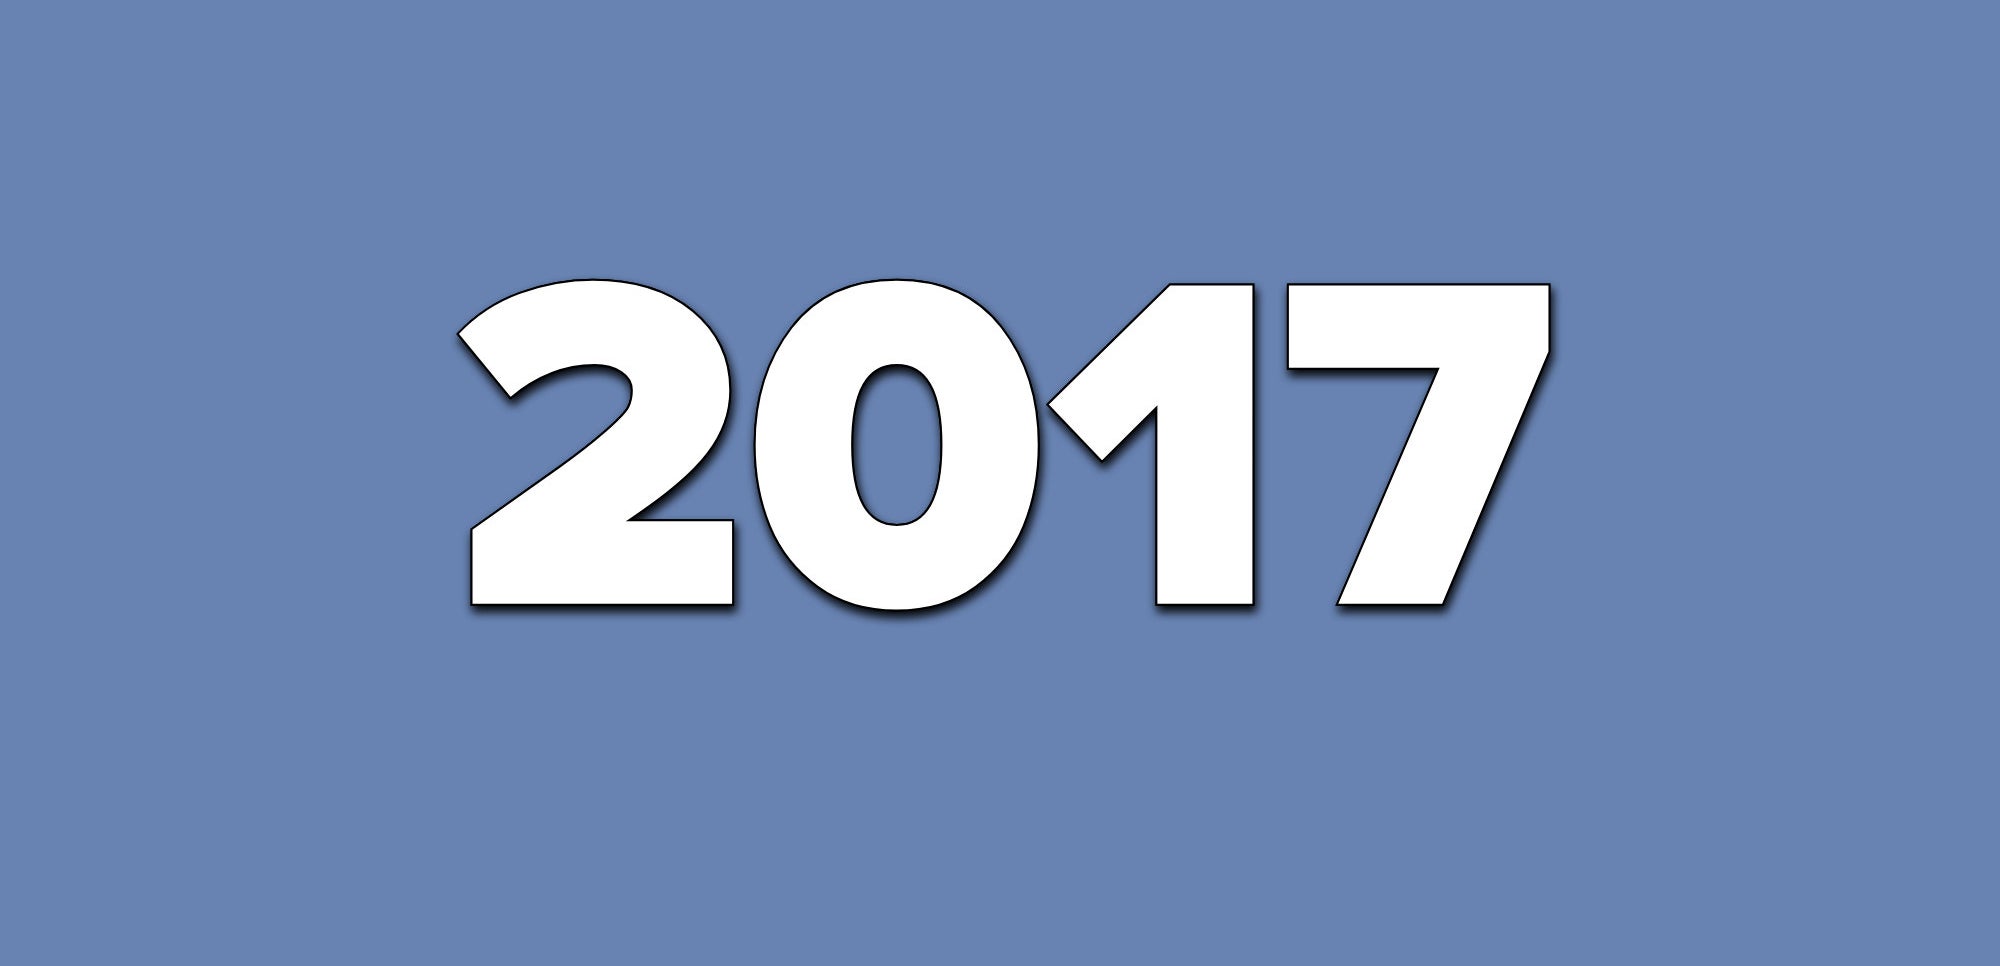 A blue background with text that says 2017